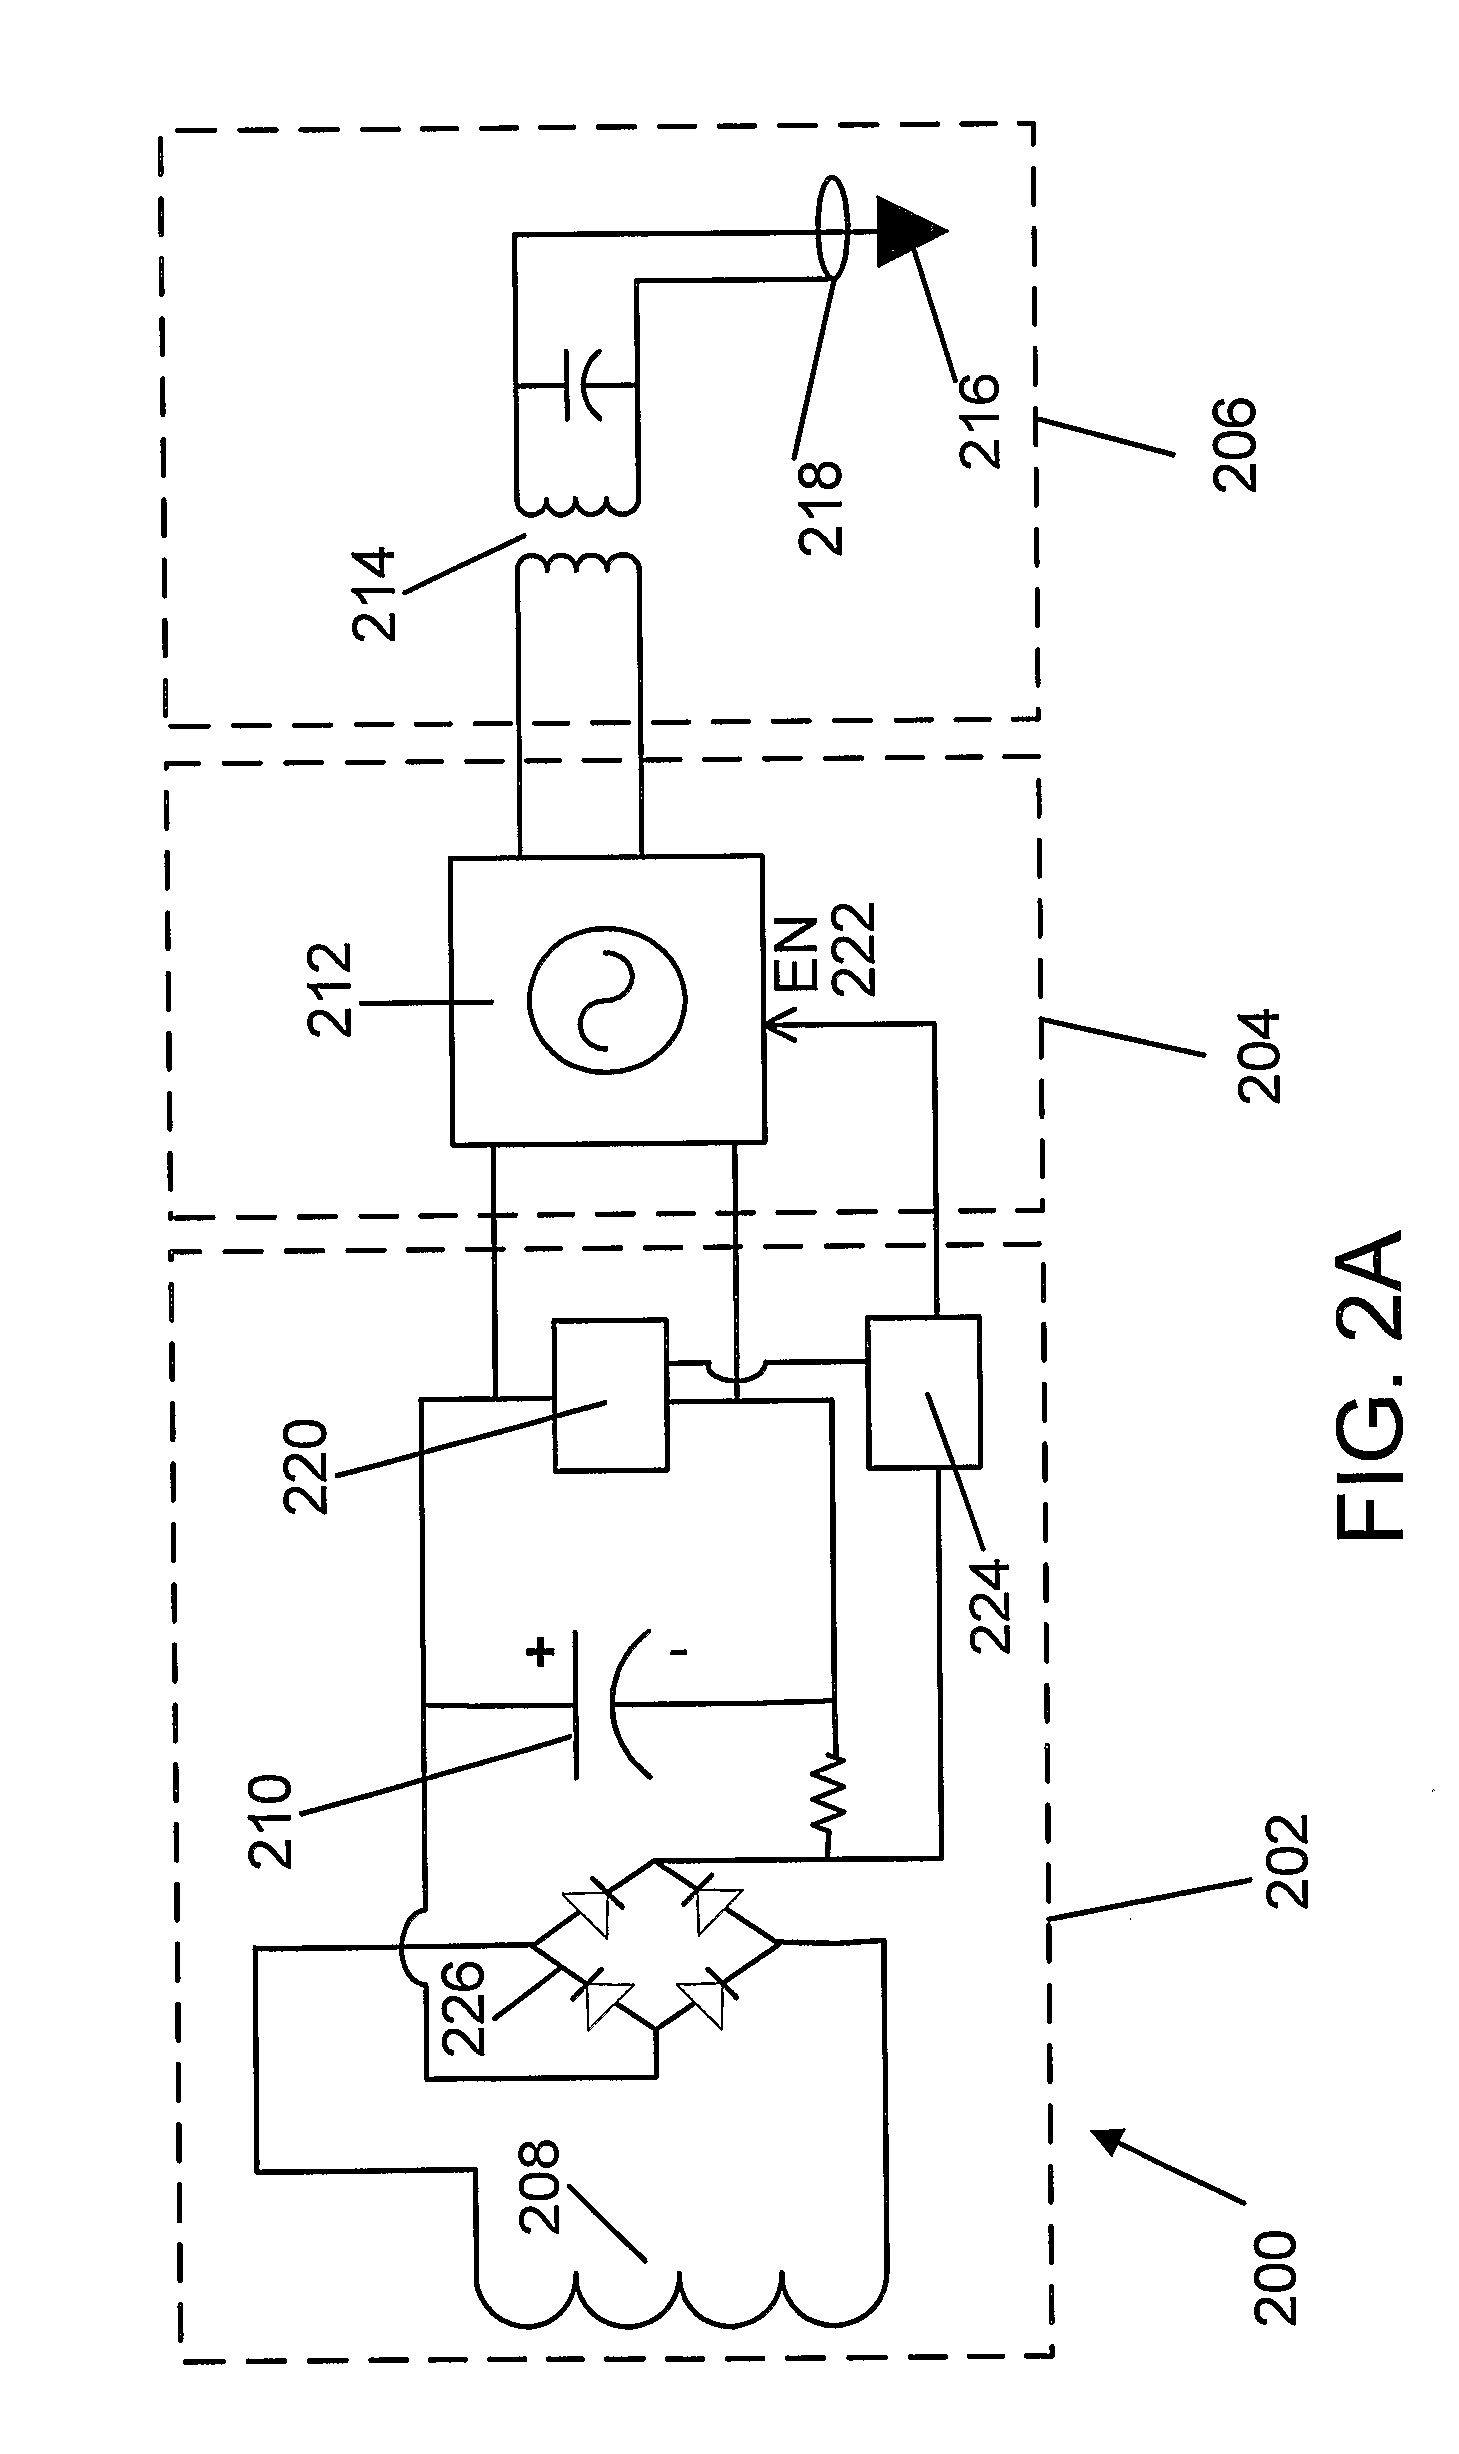 Position Detecting System and Apparatuses and Methods For Use and Control Thereof